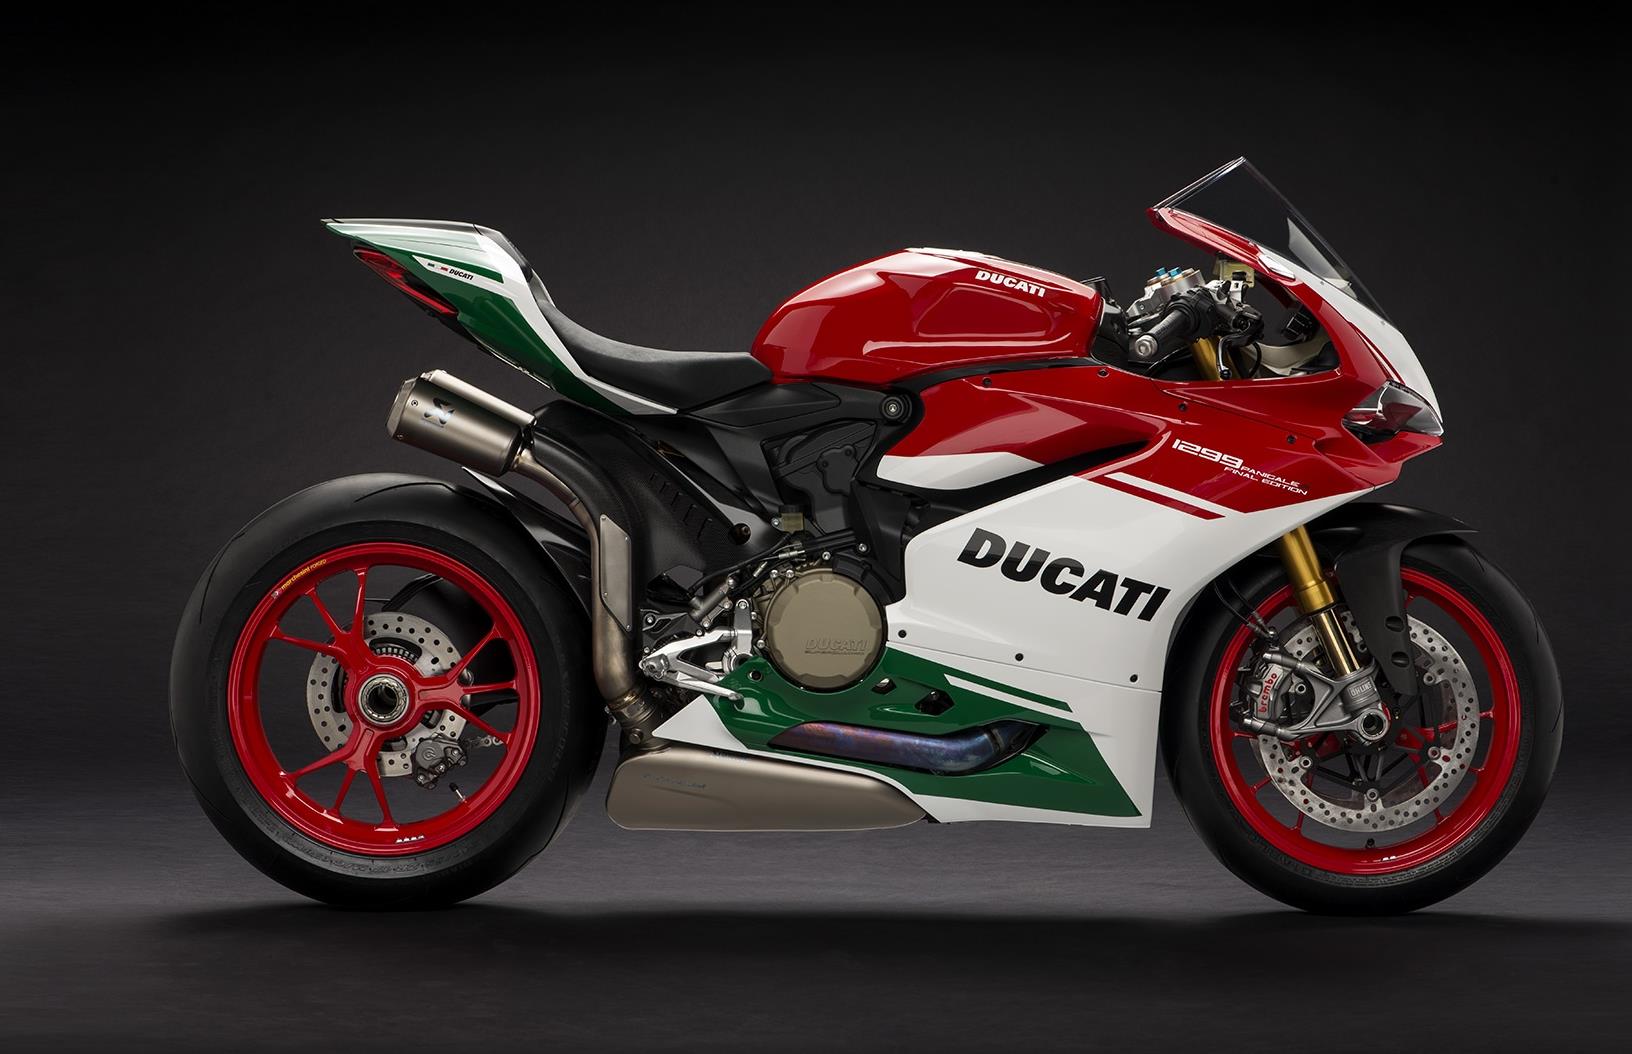 Ducati Launches The 1299 Panigale R Final Edition At Rs 58.18 Lakh